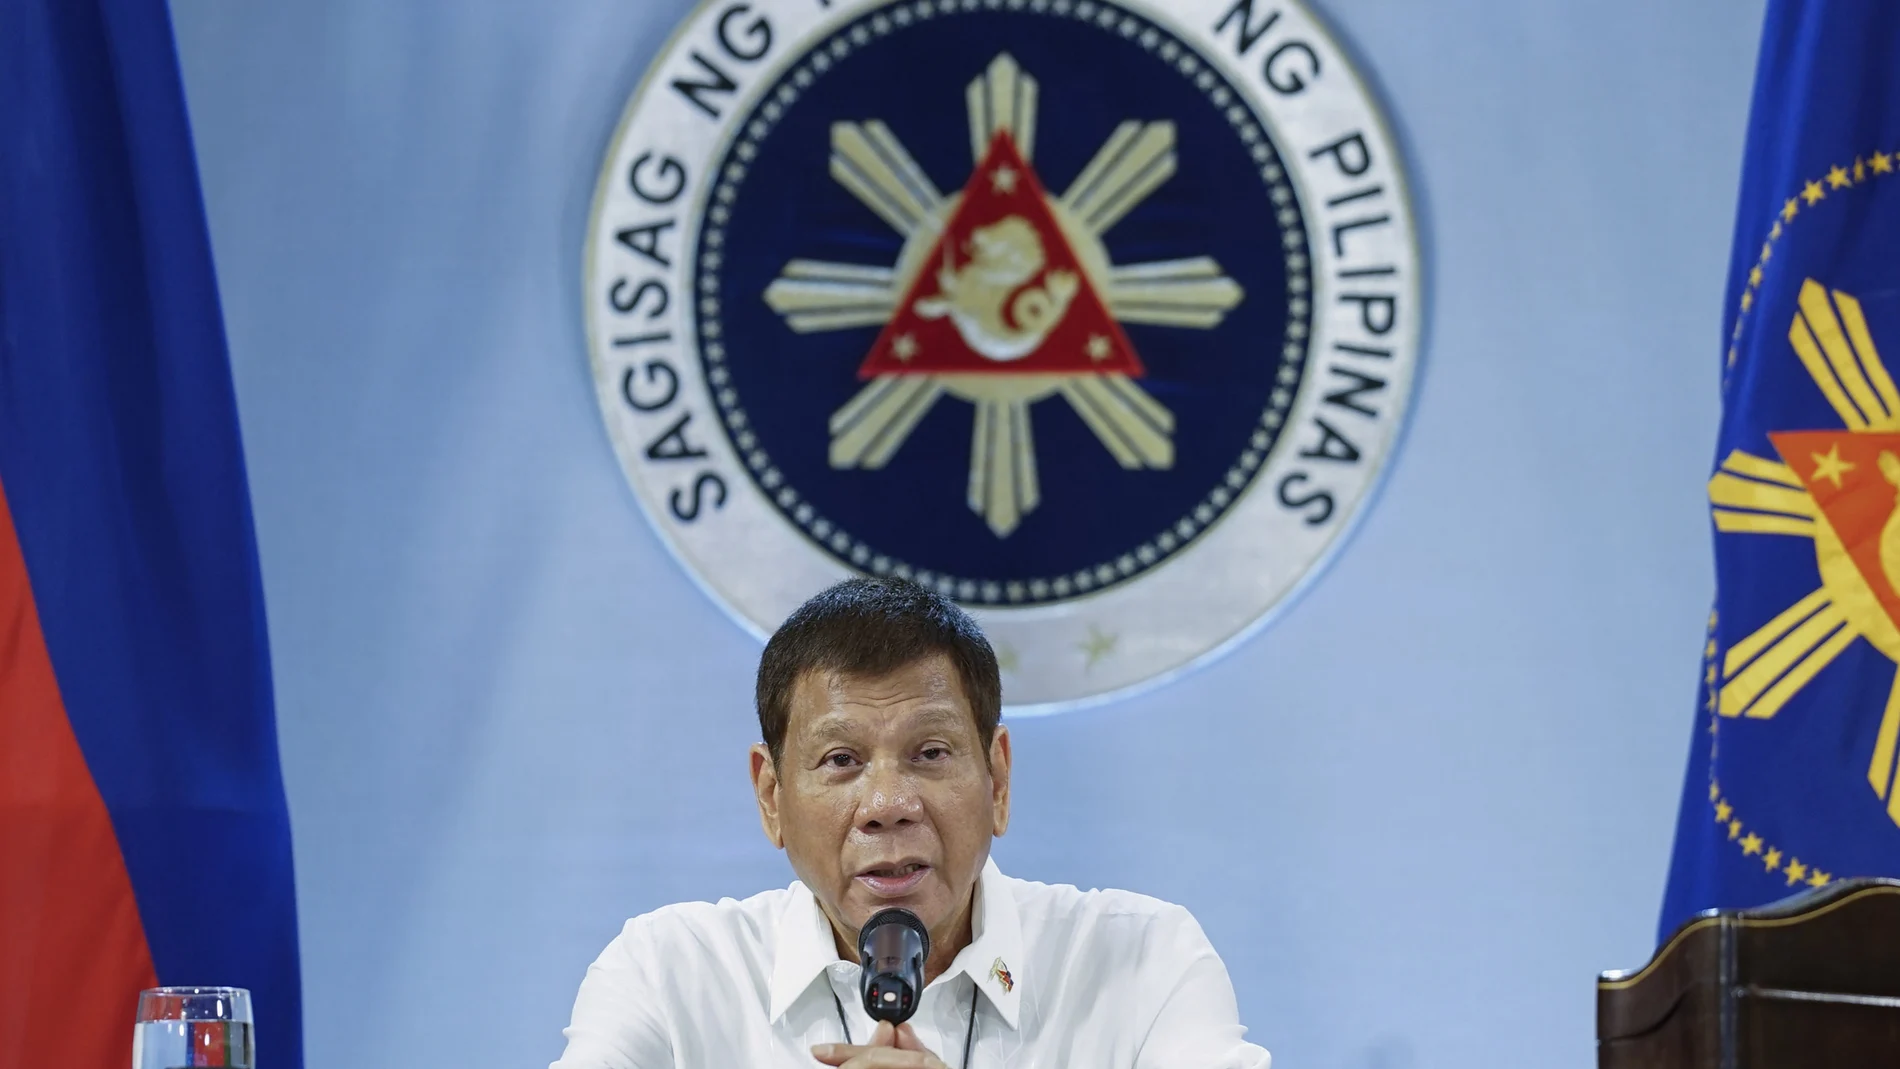 In this photo provided by the Malacanang Presidential Photographers Division, Philippine President Rodrigo Duterte gestures as he meets members of the Inter-Agency Task Force on the Emerging Infectious Diseases at the Malacanang presidential palace in Manila, Philippines on Monday Dec. 7, 2020. The Philippine president has ruled out any ceasefire and a resumption of long-stalled peace talks with communist guerrillas and renewed a vow to destroy the insurgents in his last two years in office. (King Rodriguez/Malacanang Presidential Photographers Division via AP)